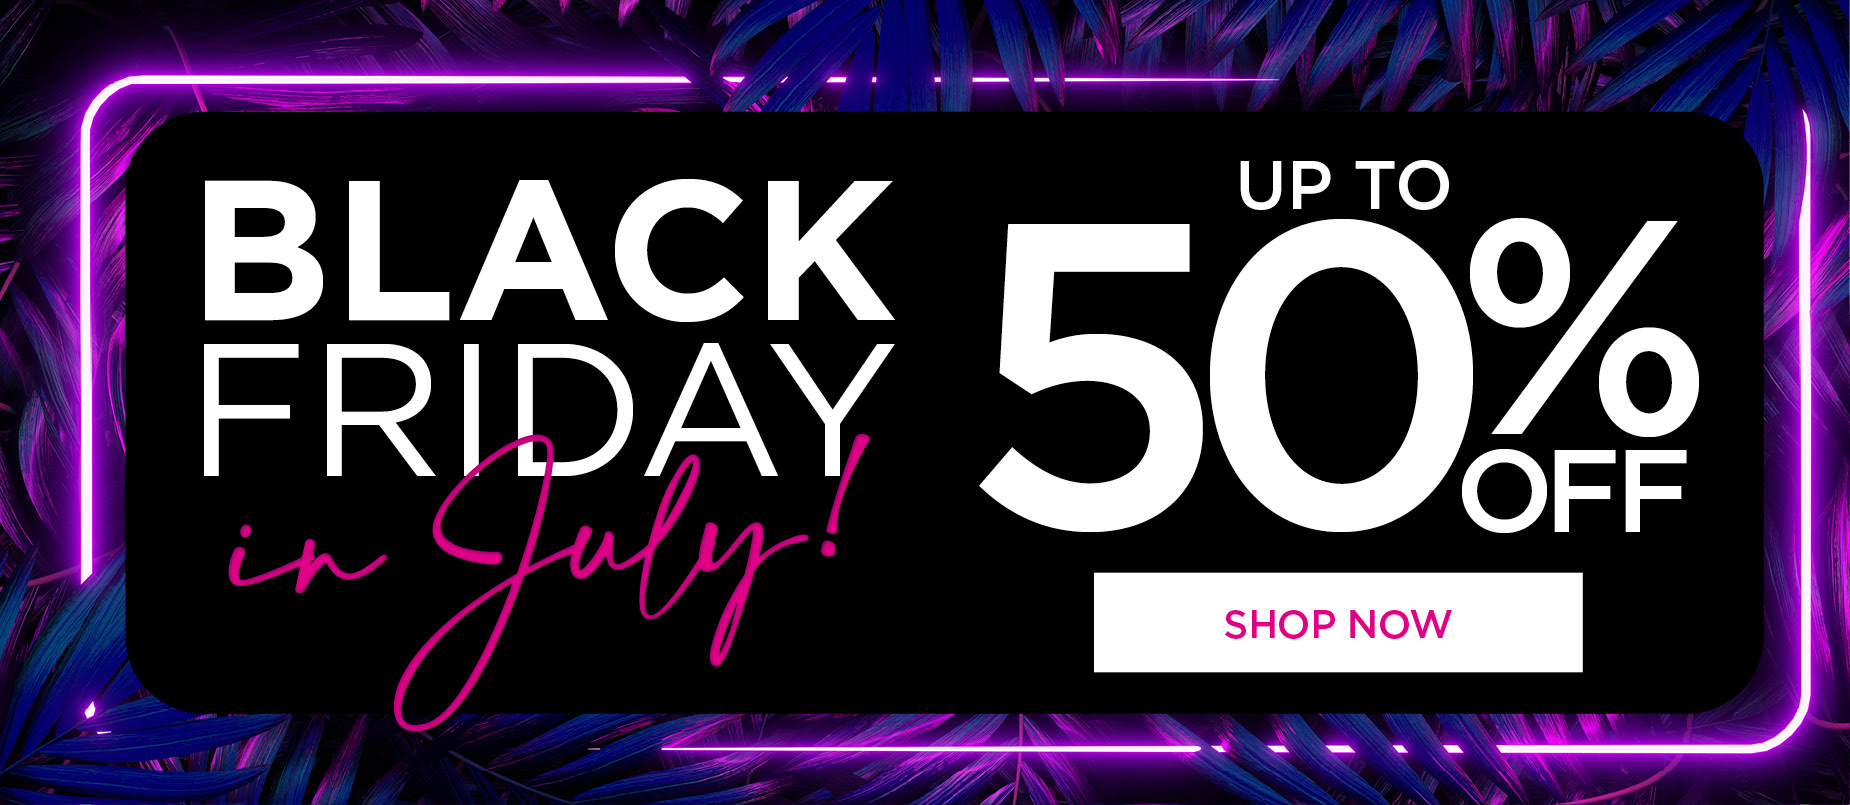 BLACK FRIDAY in JULY: up to 50% OFF!